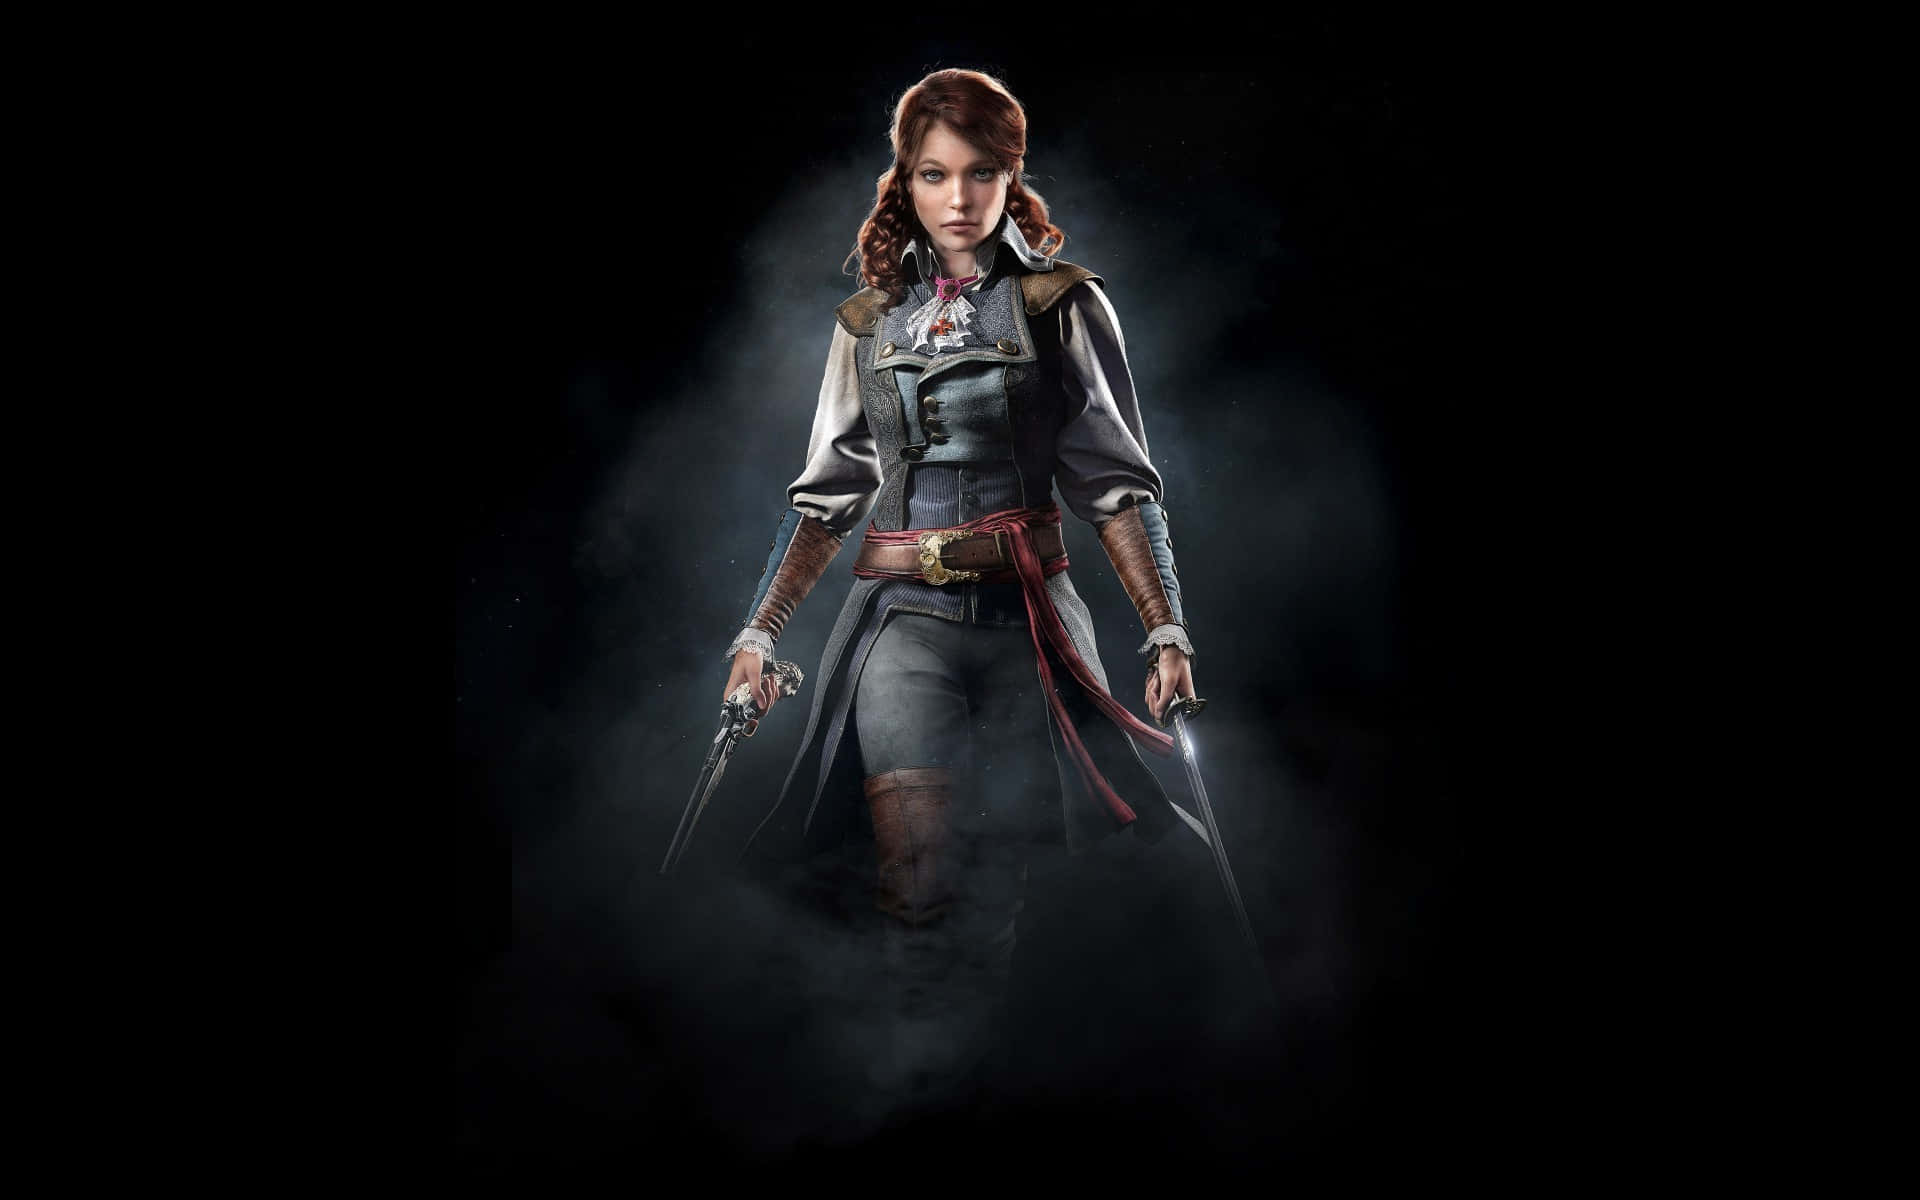 Elise De La Serre, a royalist and protagonist from Assassin's Creed Unity Wallpaper